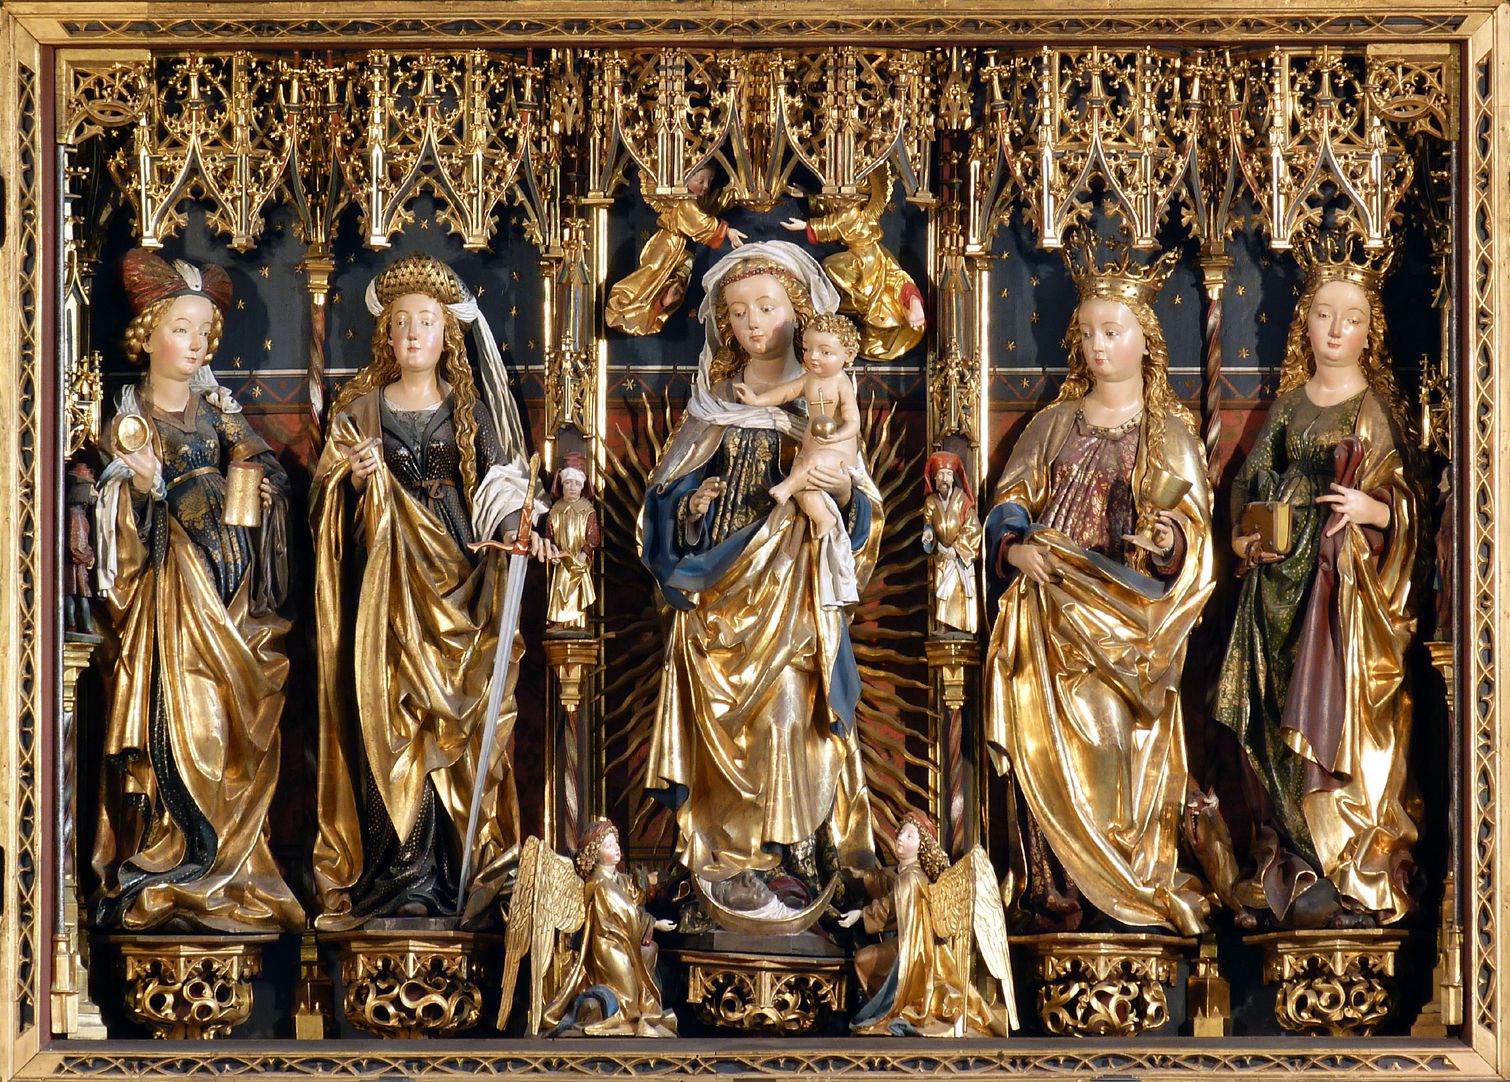 Zwickau high altarpiece shrine, from l. after r. : Mary Magdalene, Katharina, Mary with the baby Jesus, Barbara and Margaret - minor prophets in between?